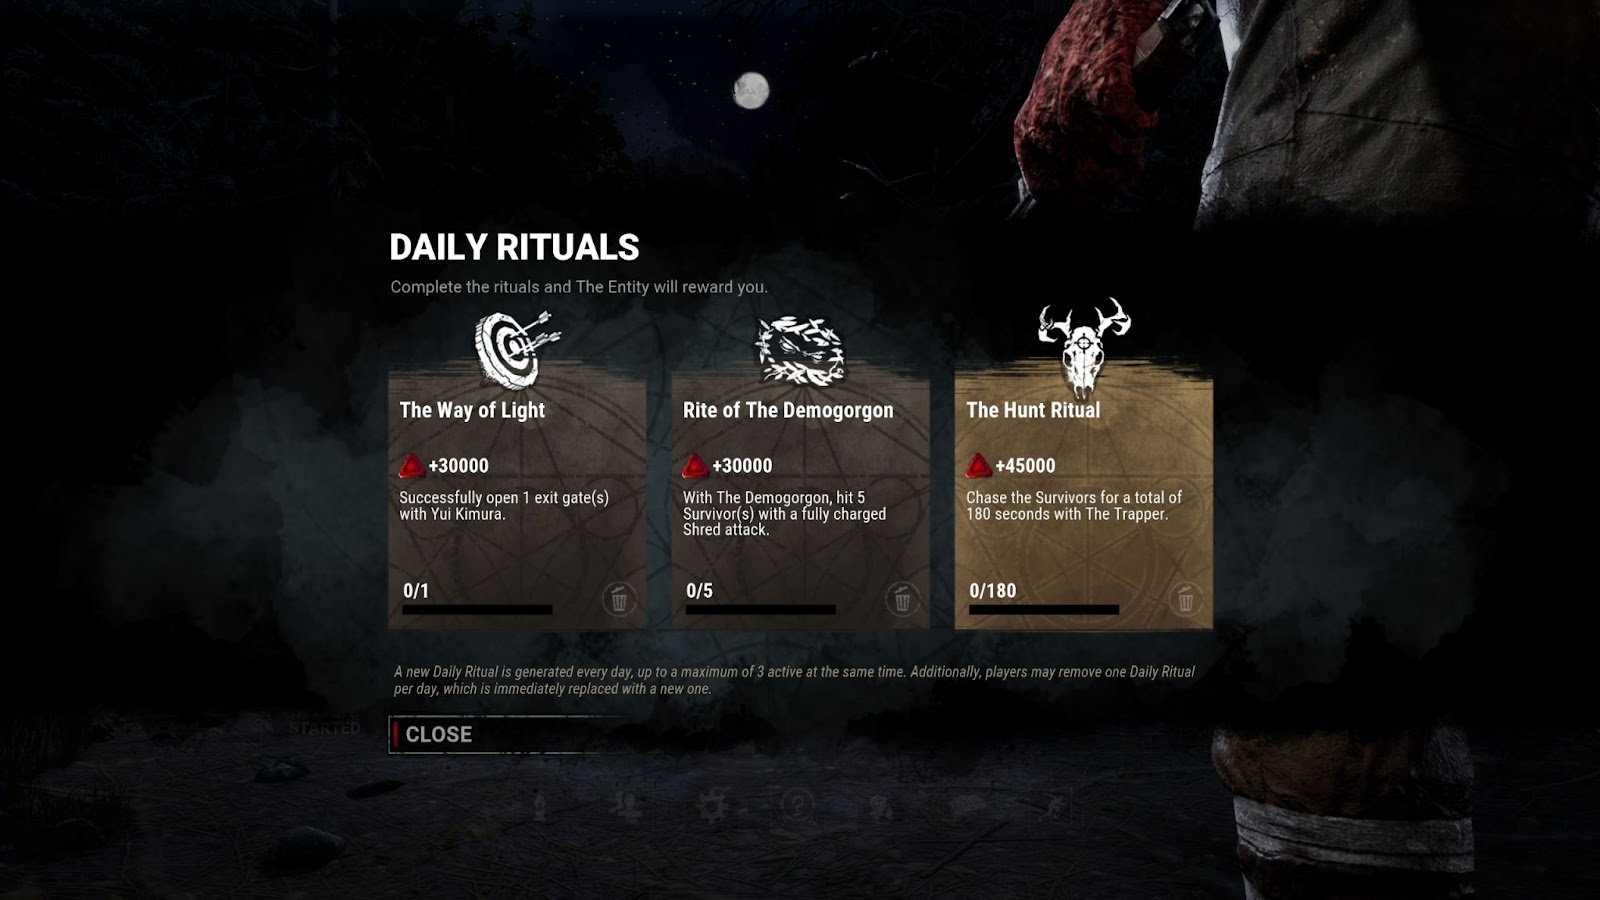 The Daily Rituals screen from Dead by Daylight is shown. Pictured is a set of three missions for the day for users to complete and the rewards for completed each objective.